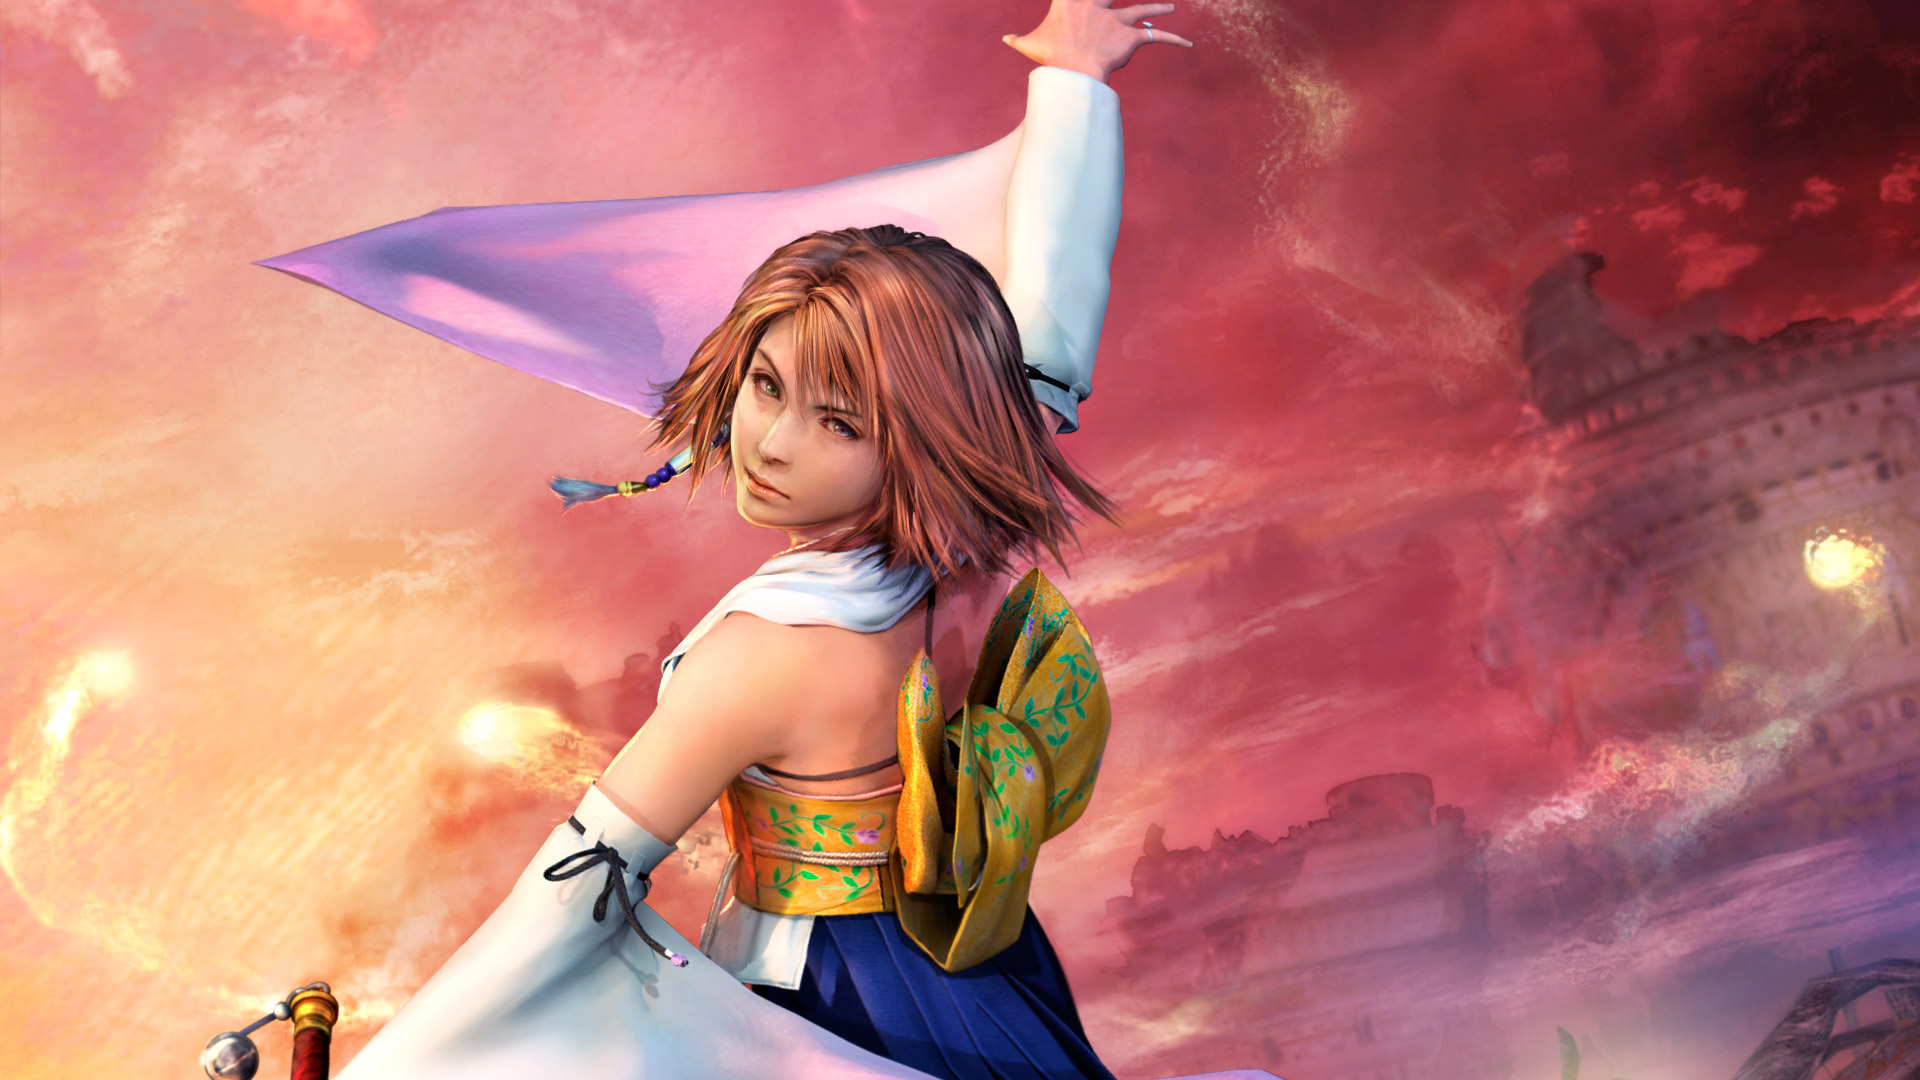 Wallpapers from Final Fantasy X HD 